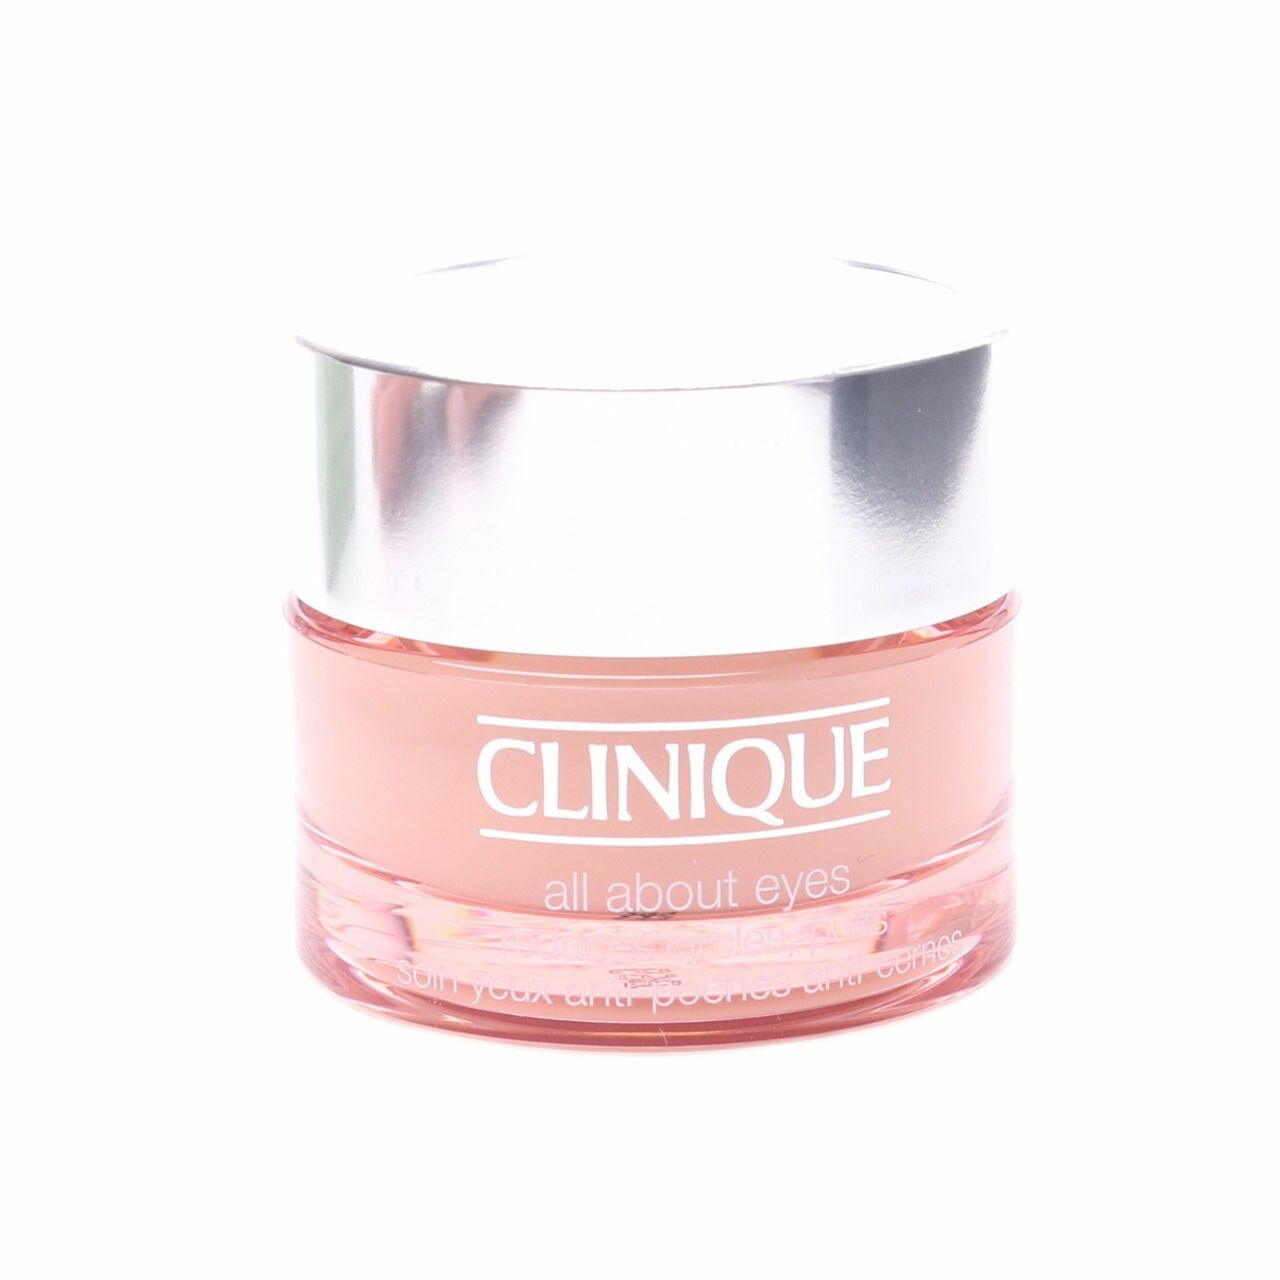 Clinique Puffiness Poches All About Eyes Reduces Circles Puffs For All Skin